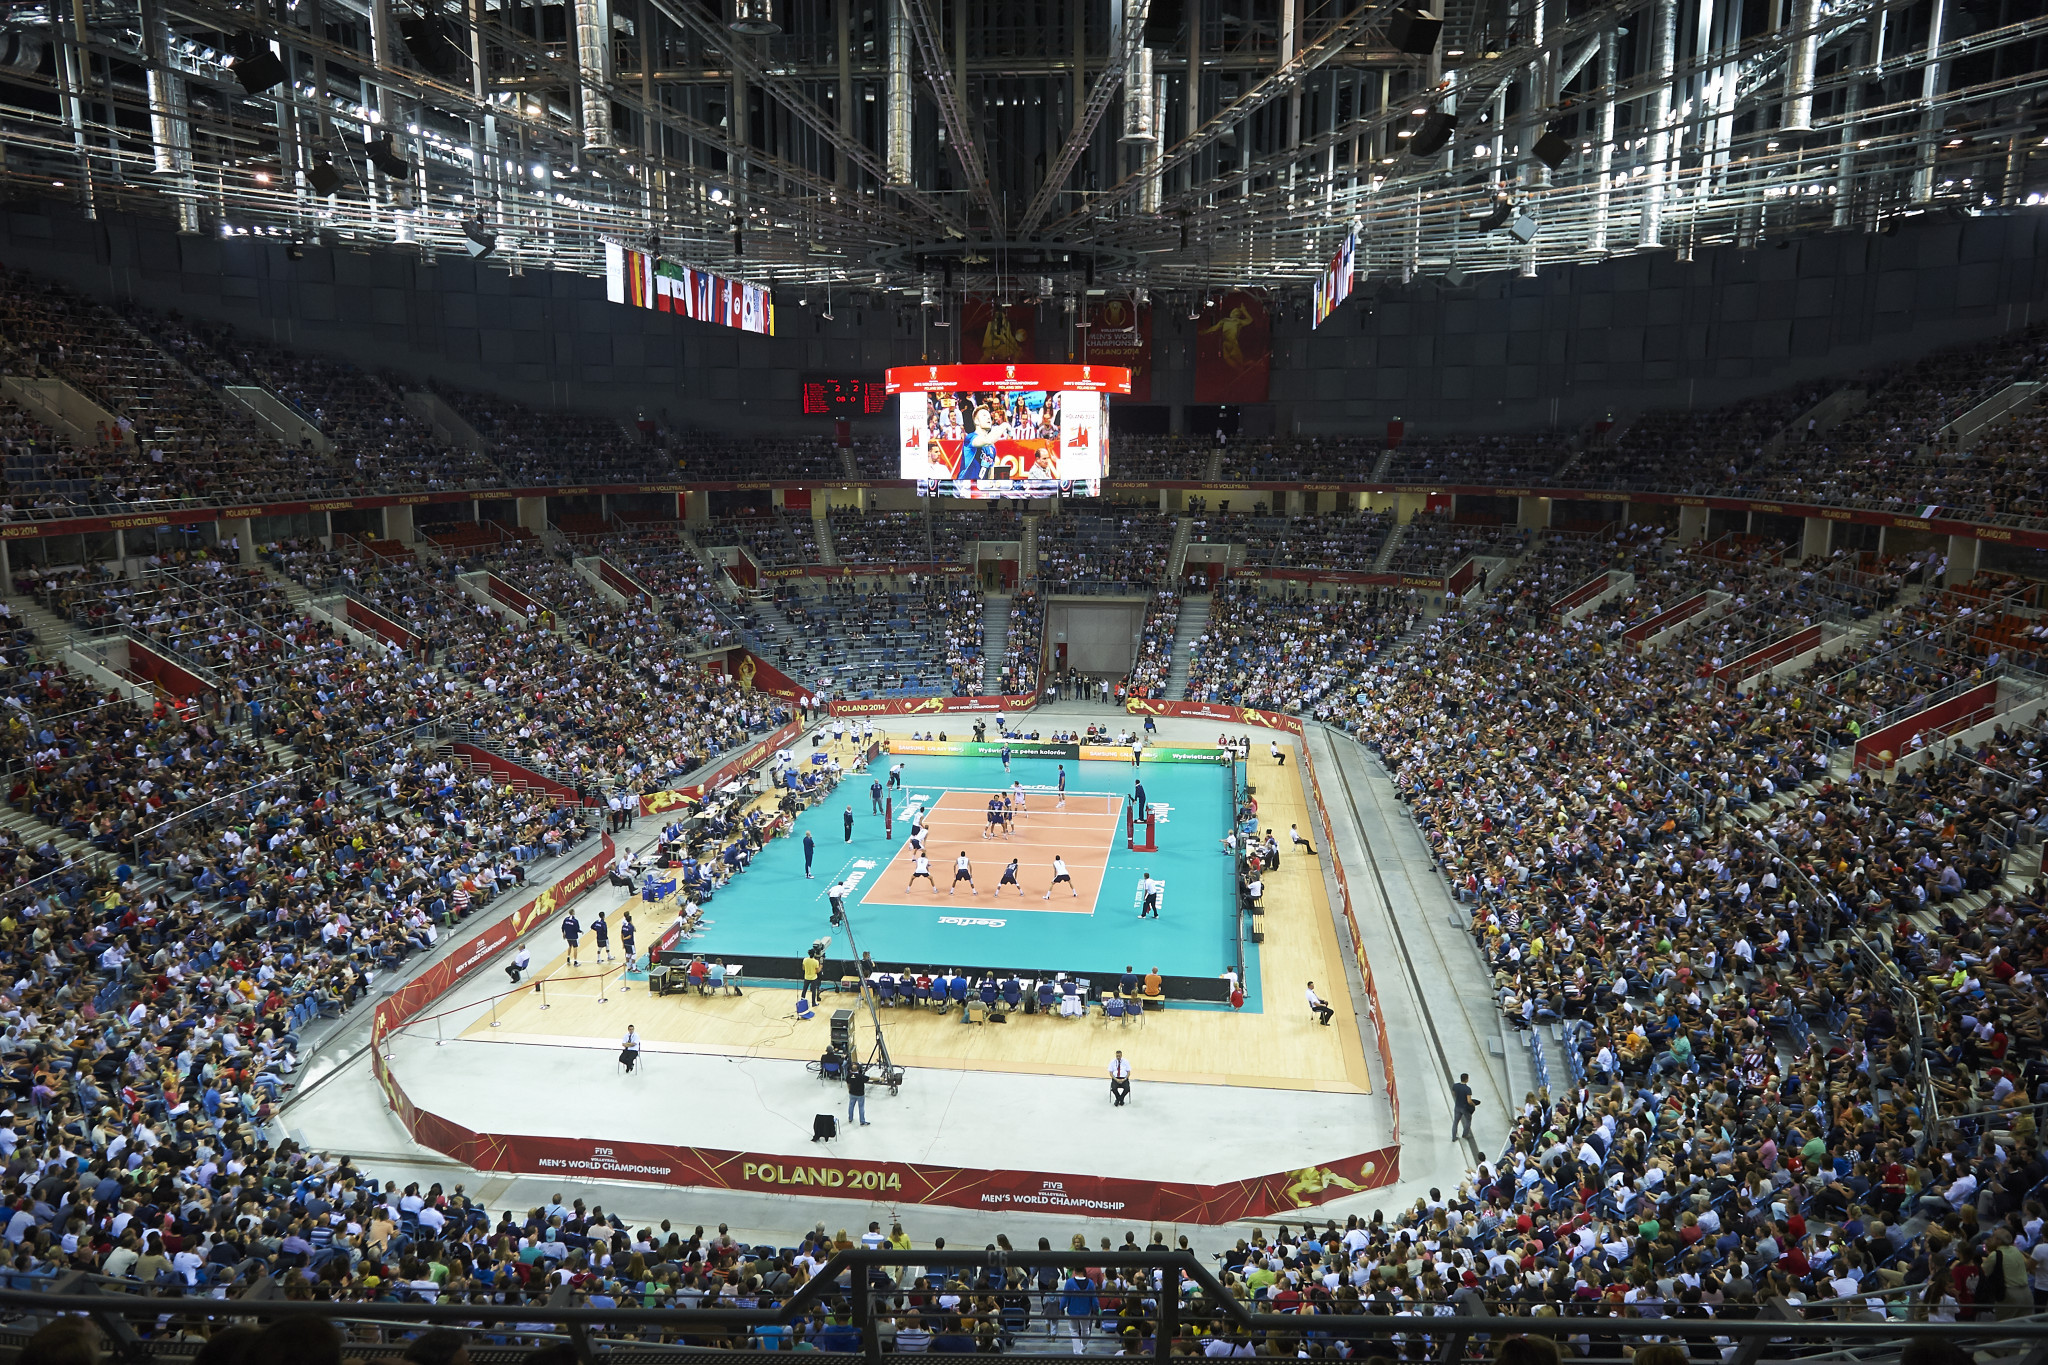 Kraków hosted the 2014 Men's Volleyball World Championship ©Getty Images